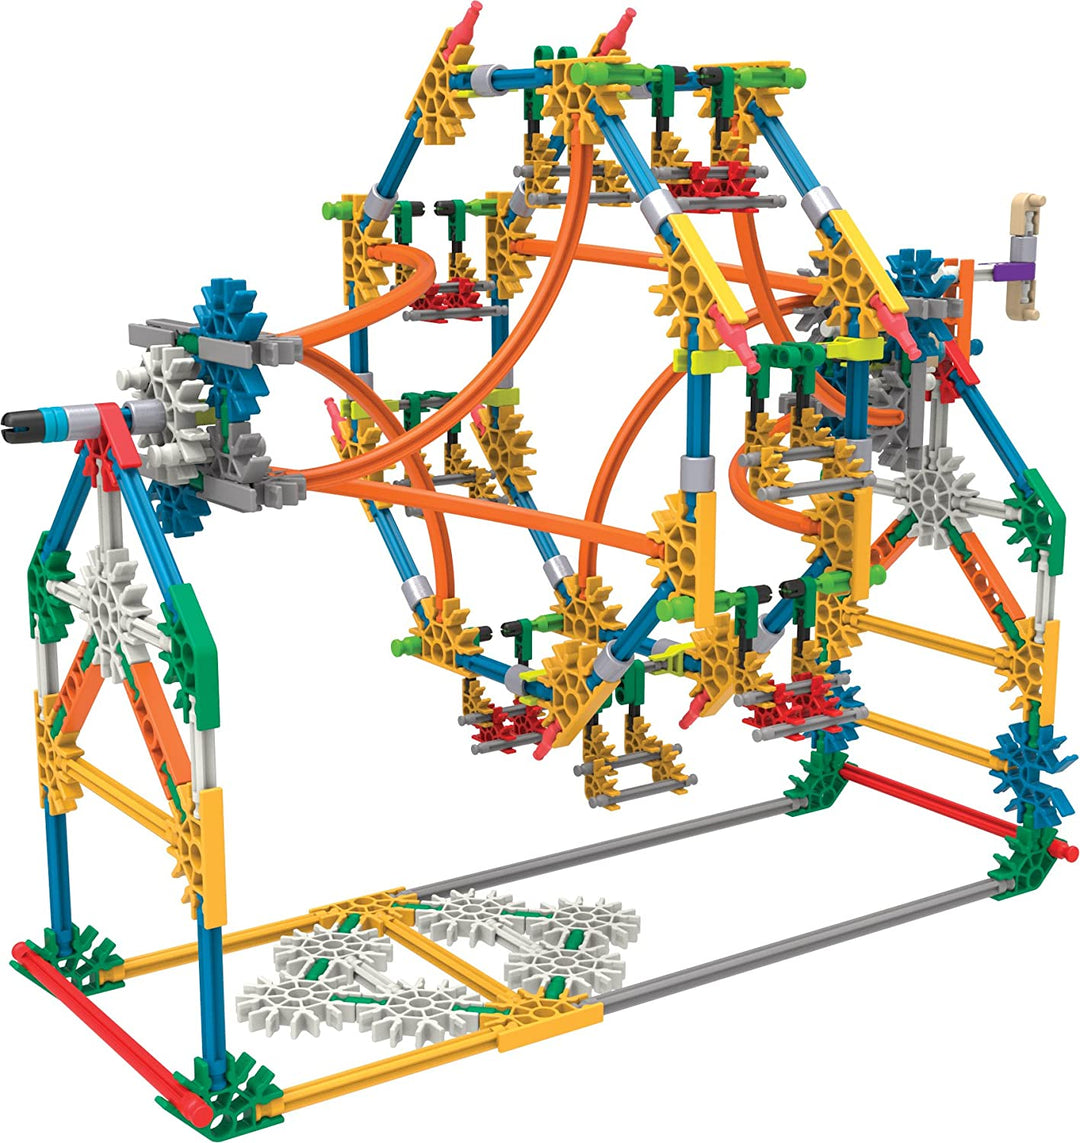 K'Nex 77078 K’NEX STEM Explorations Swing Ride Building Set for Ages 8+ Engineering Education Toy 486 Pieces